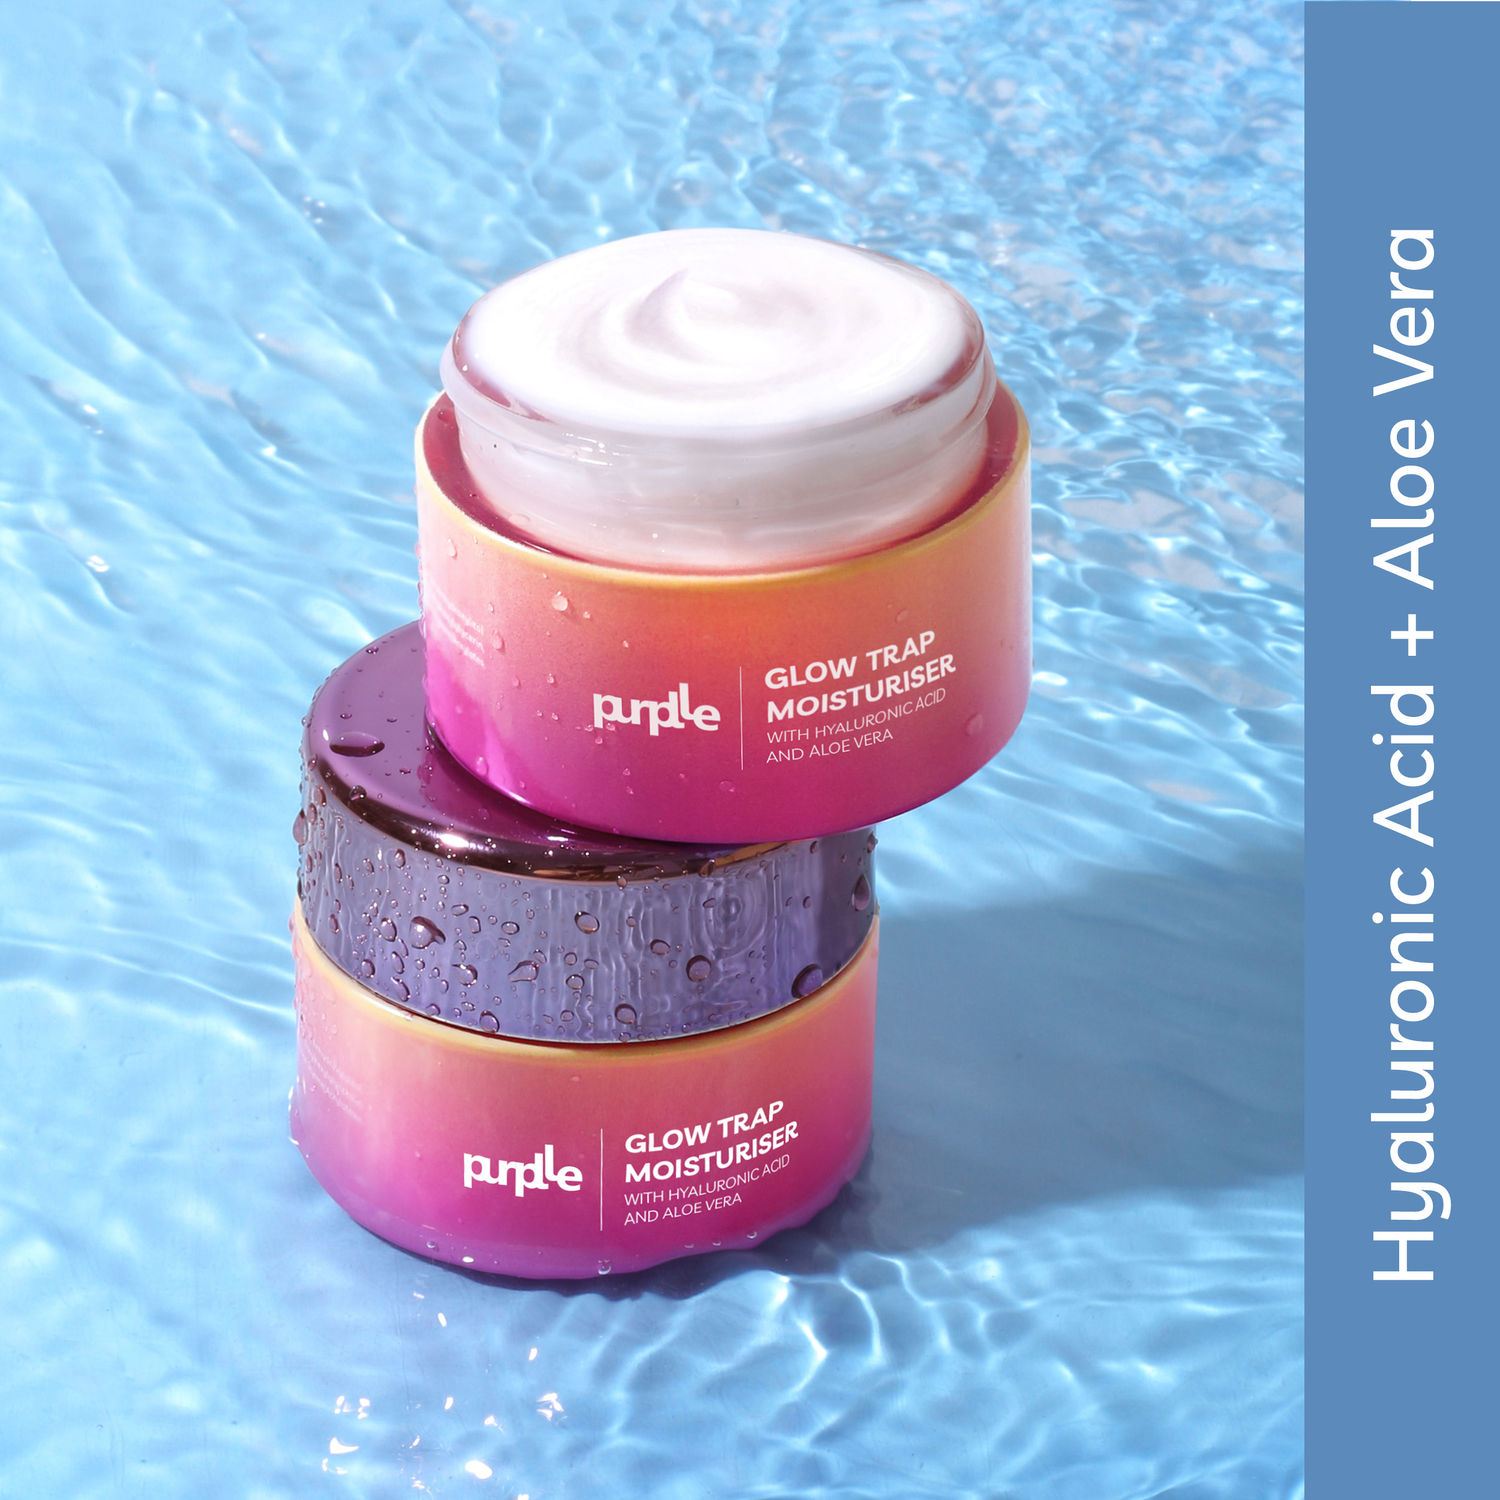 Purplle Glow Trap Moisturiser With Hyaluronic Acid and Aloe Vera (45 gm)